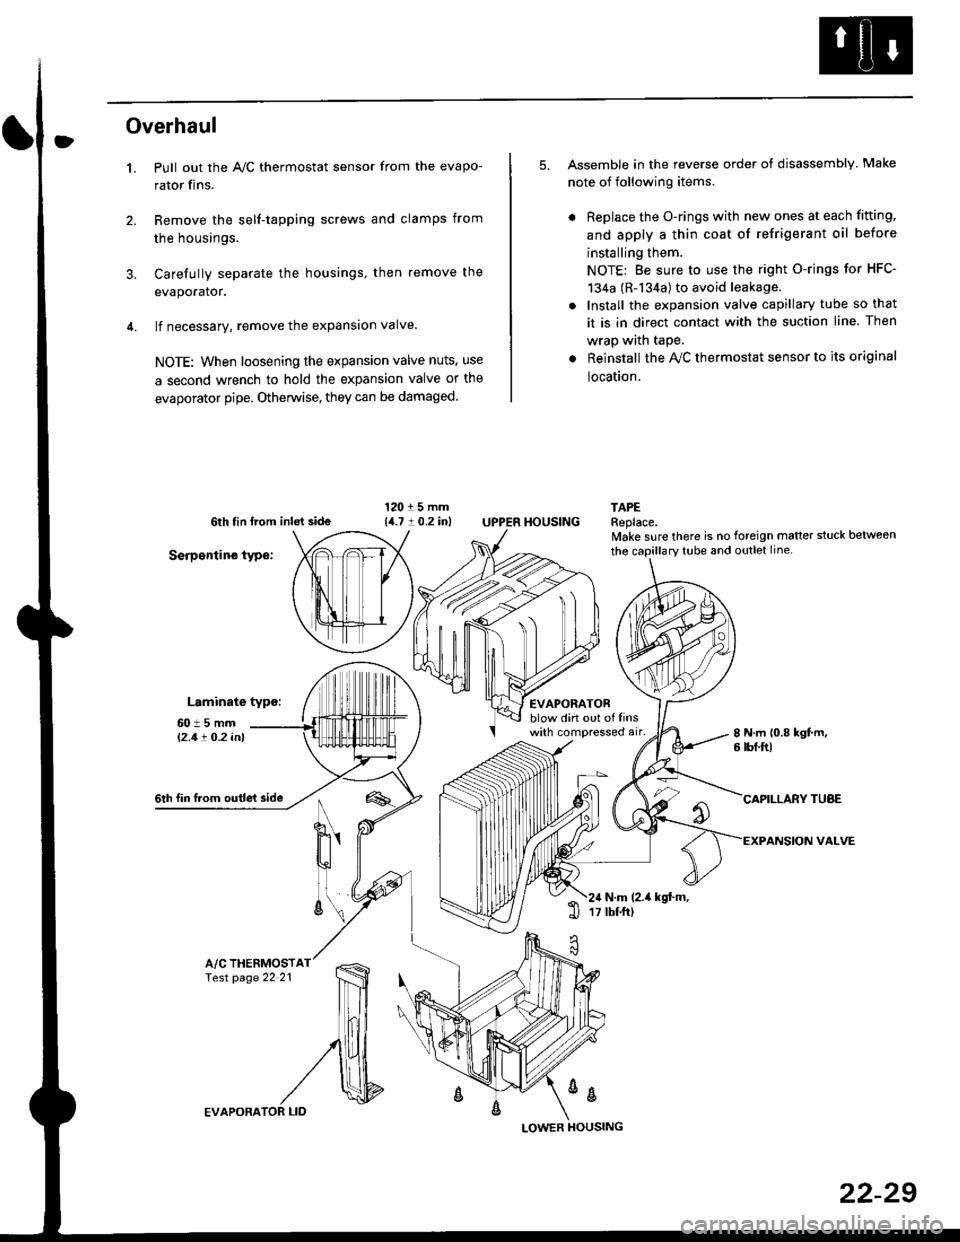 HONDA CIVIC 1996 6.G Service Manual Overhaul
1.
3.
Pull out the A,/C thermostat sensor from the evapo-
rator fins.
Remove the self-tapping screws and clamps from
the housings.
Carefully separate the housings, then remove the
evaporator.